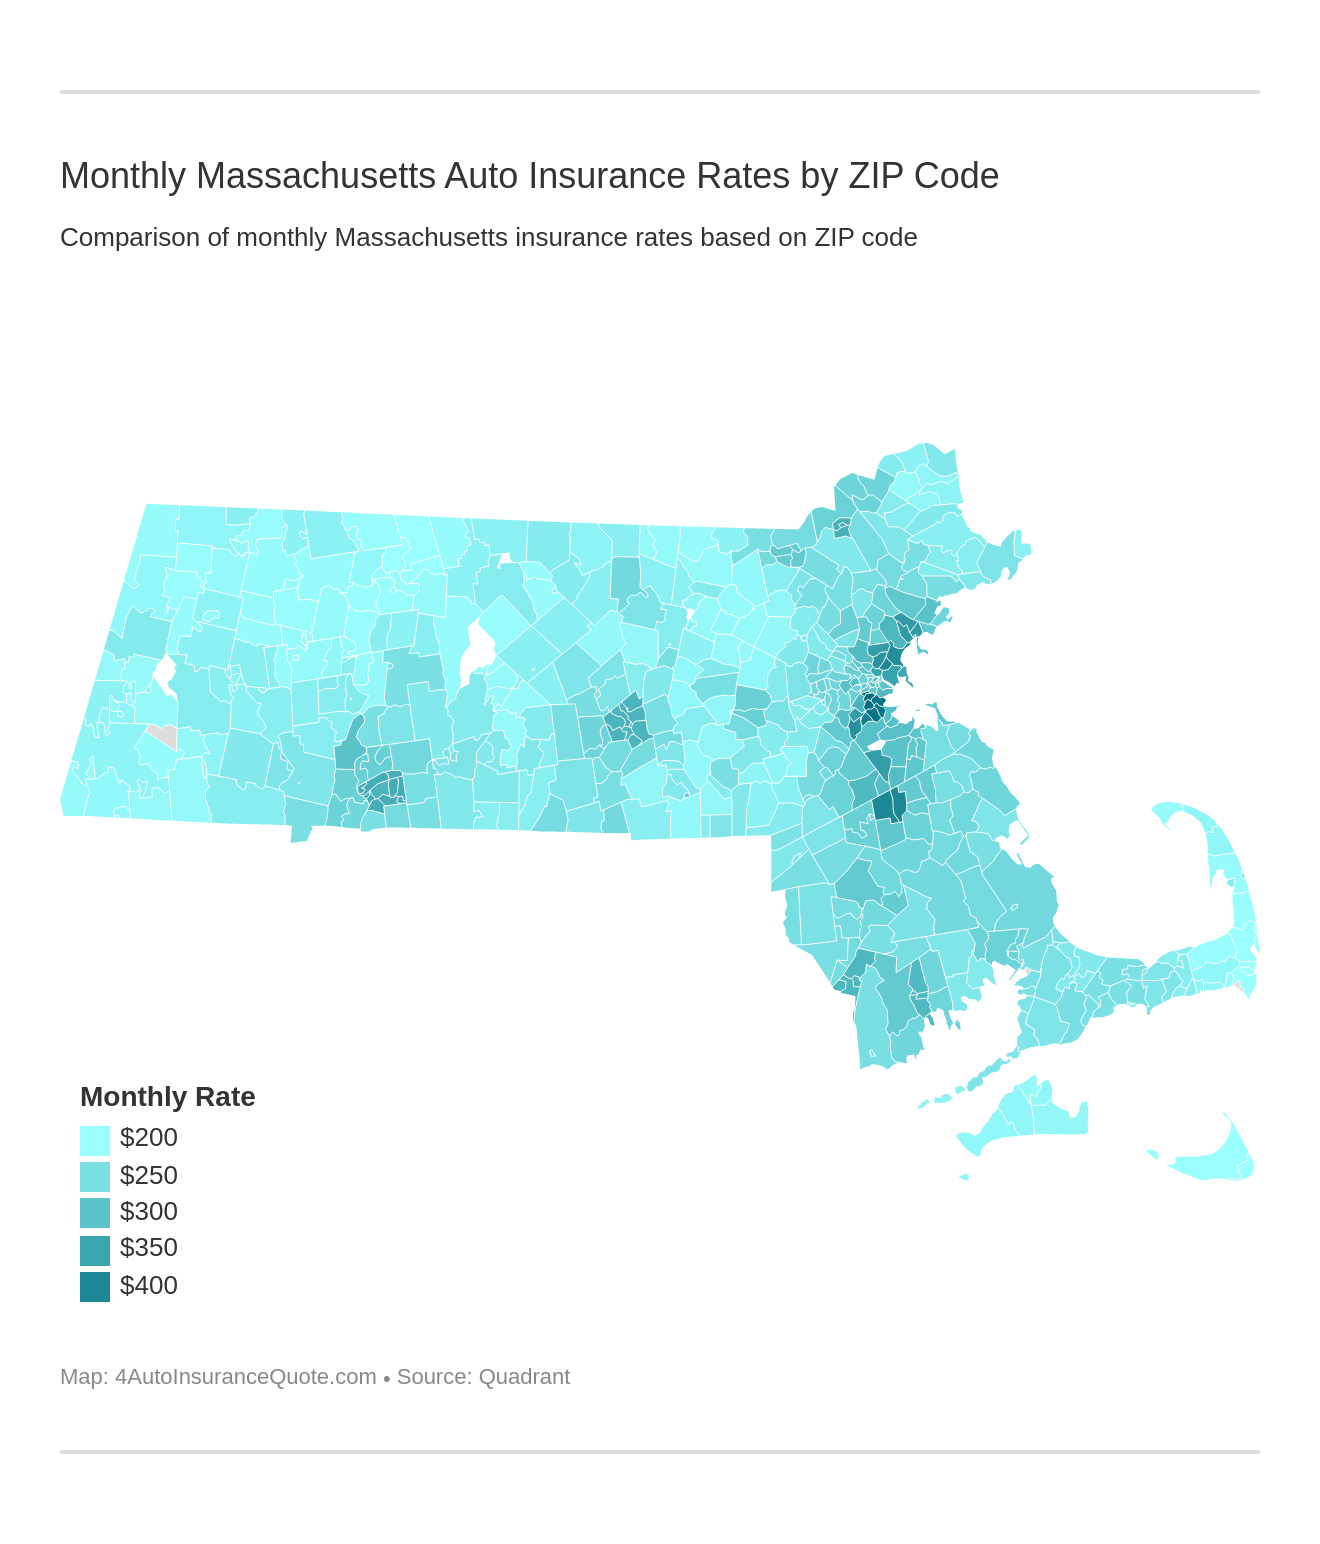 Monthly Massachusetts Auto Insurance Rates by ZIP Code